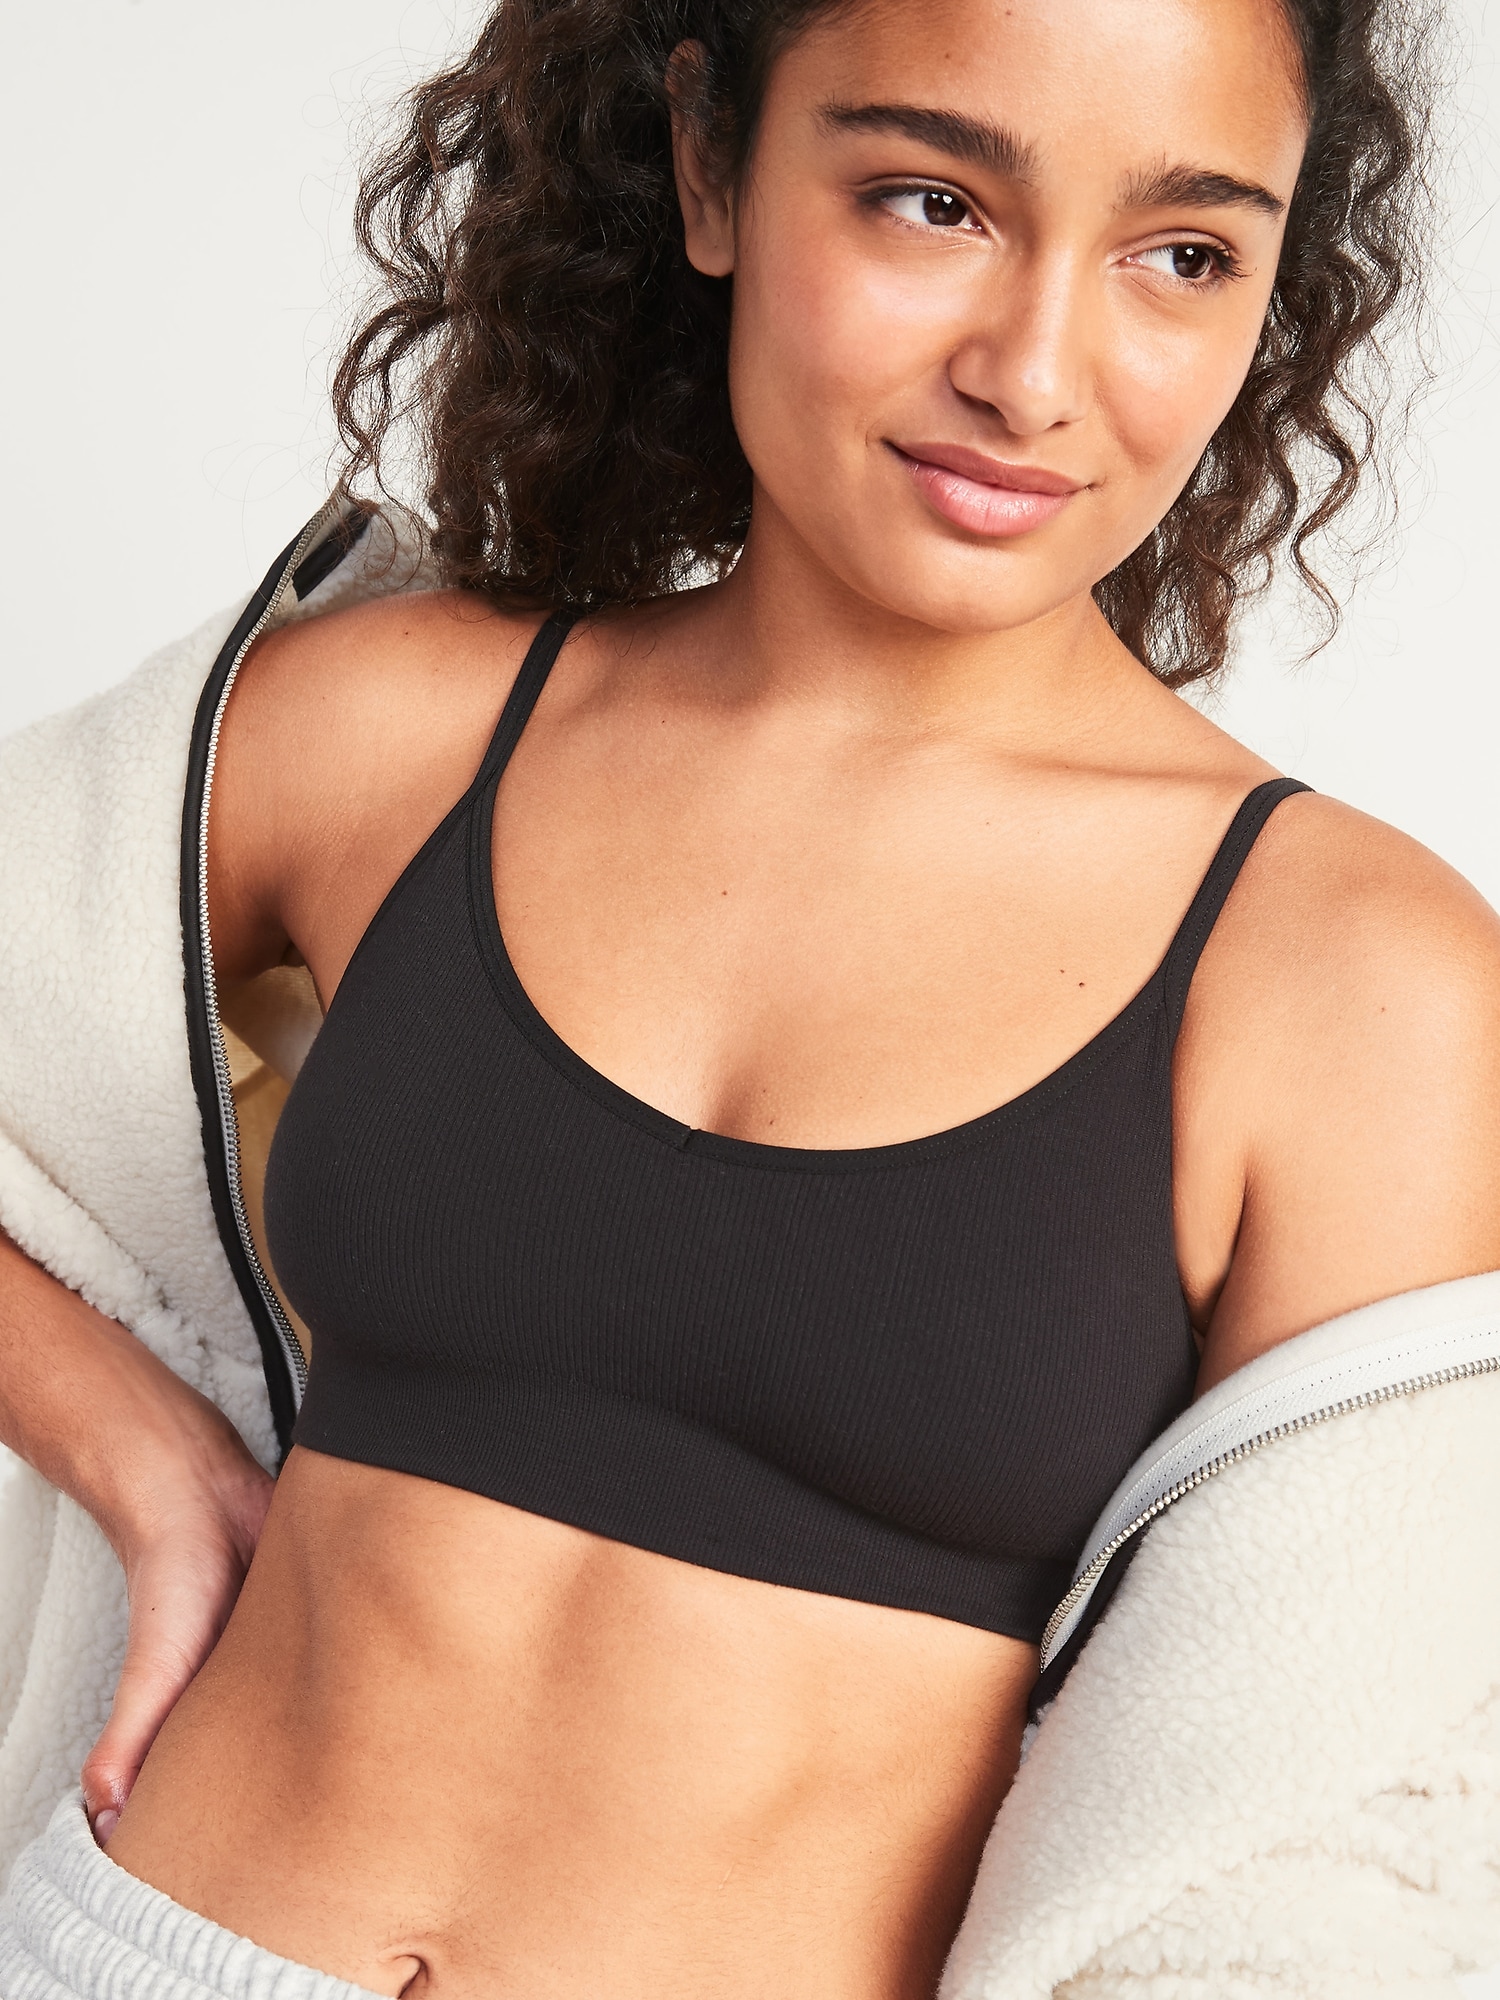 Old Navy Seamless Lounge Bralette Top